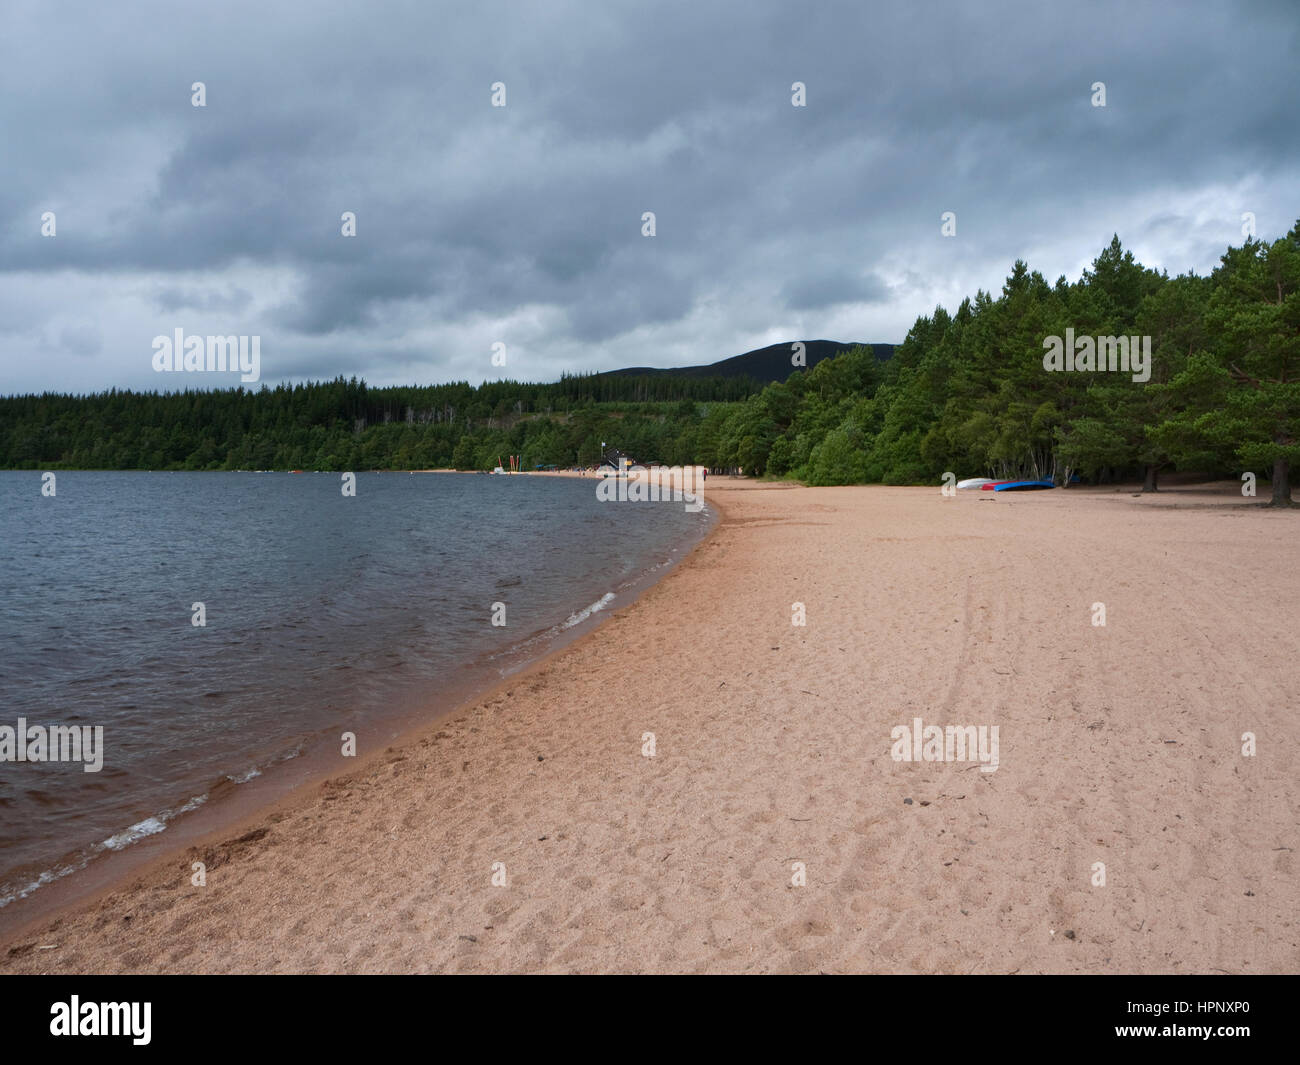 Sandy beach on the shore of Loch Morlich, a popular tourist destination in the Glenmore Forest Park, Cairngorms National Park, Scotland Stock Photo